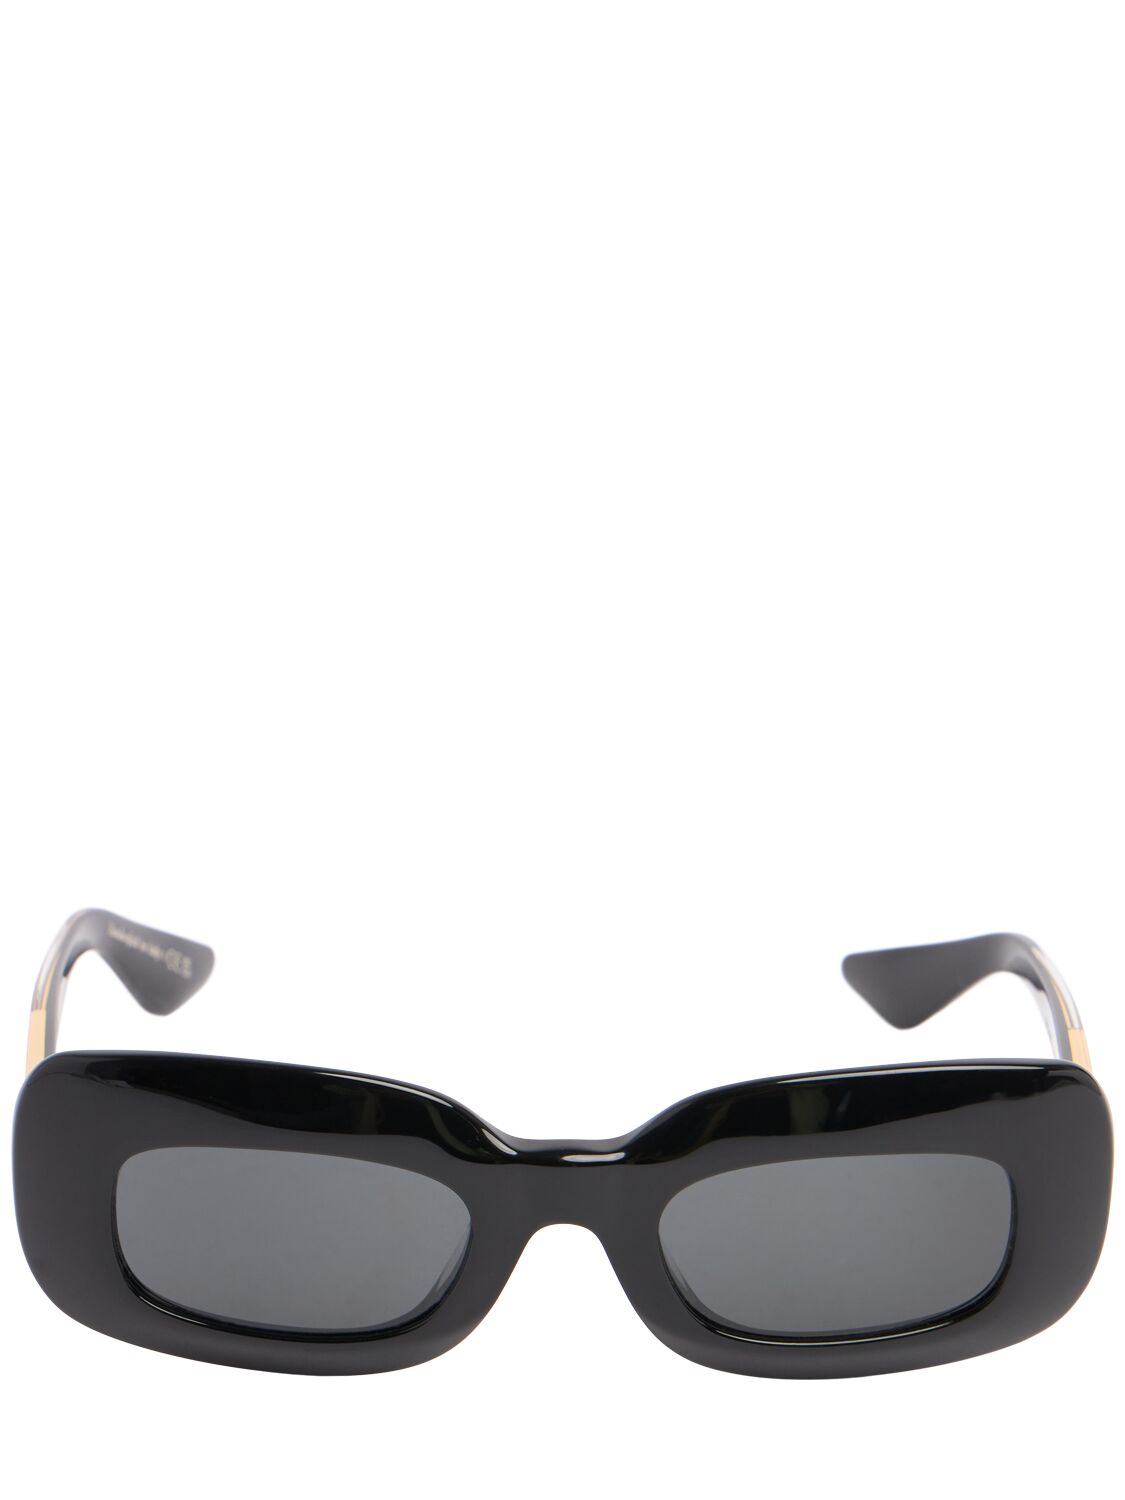 X Oliver Peoples Sunglasses